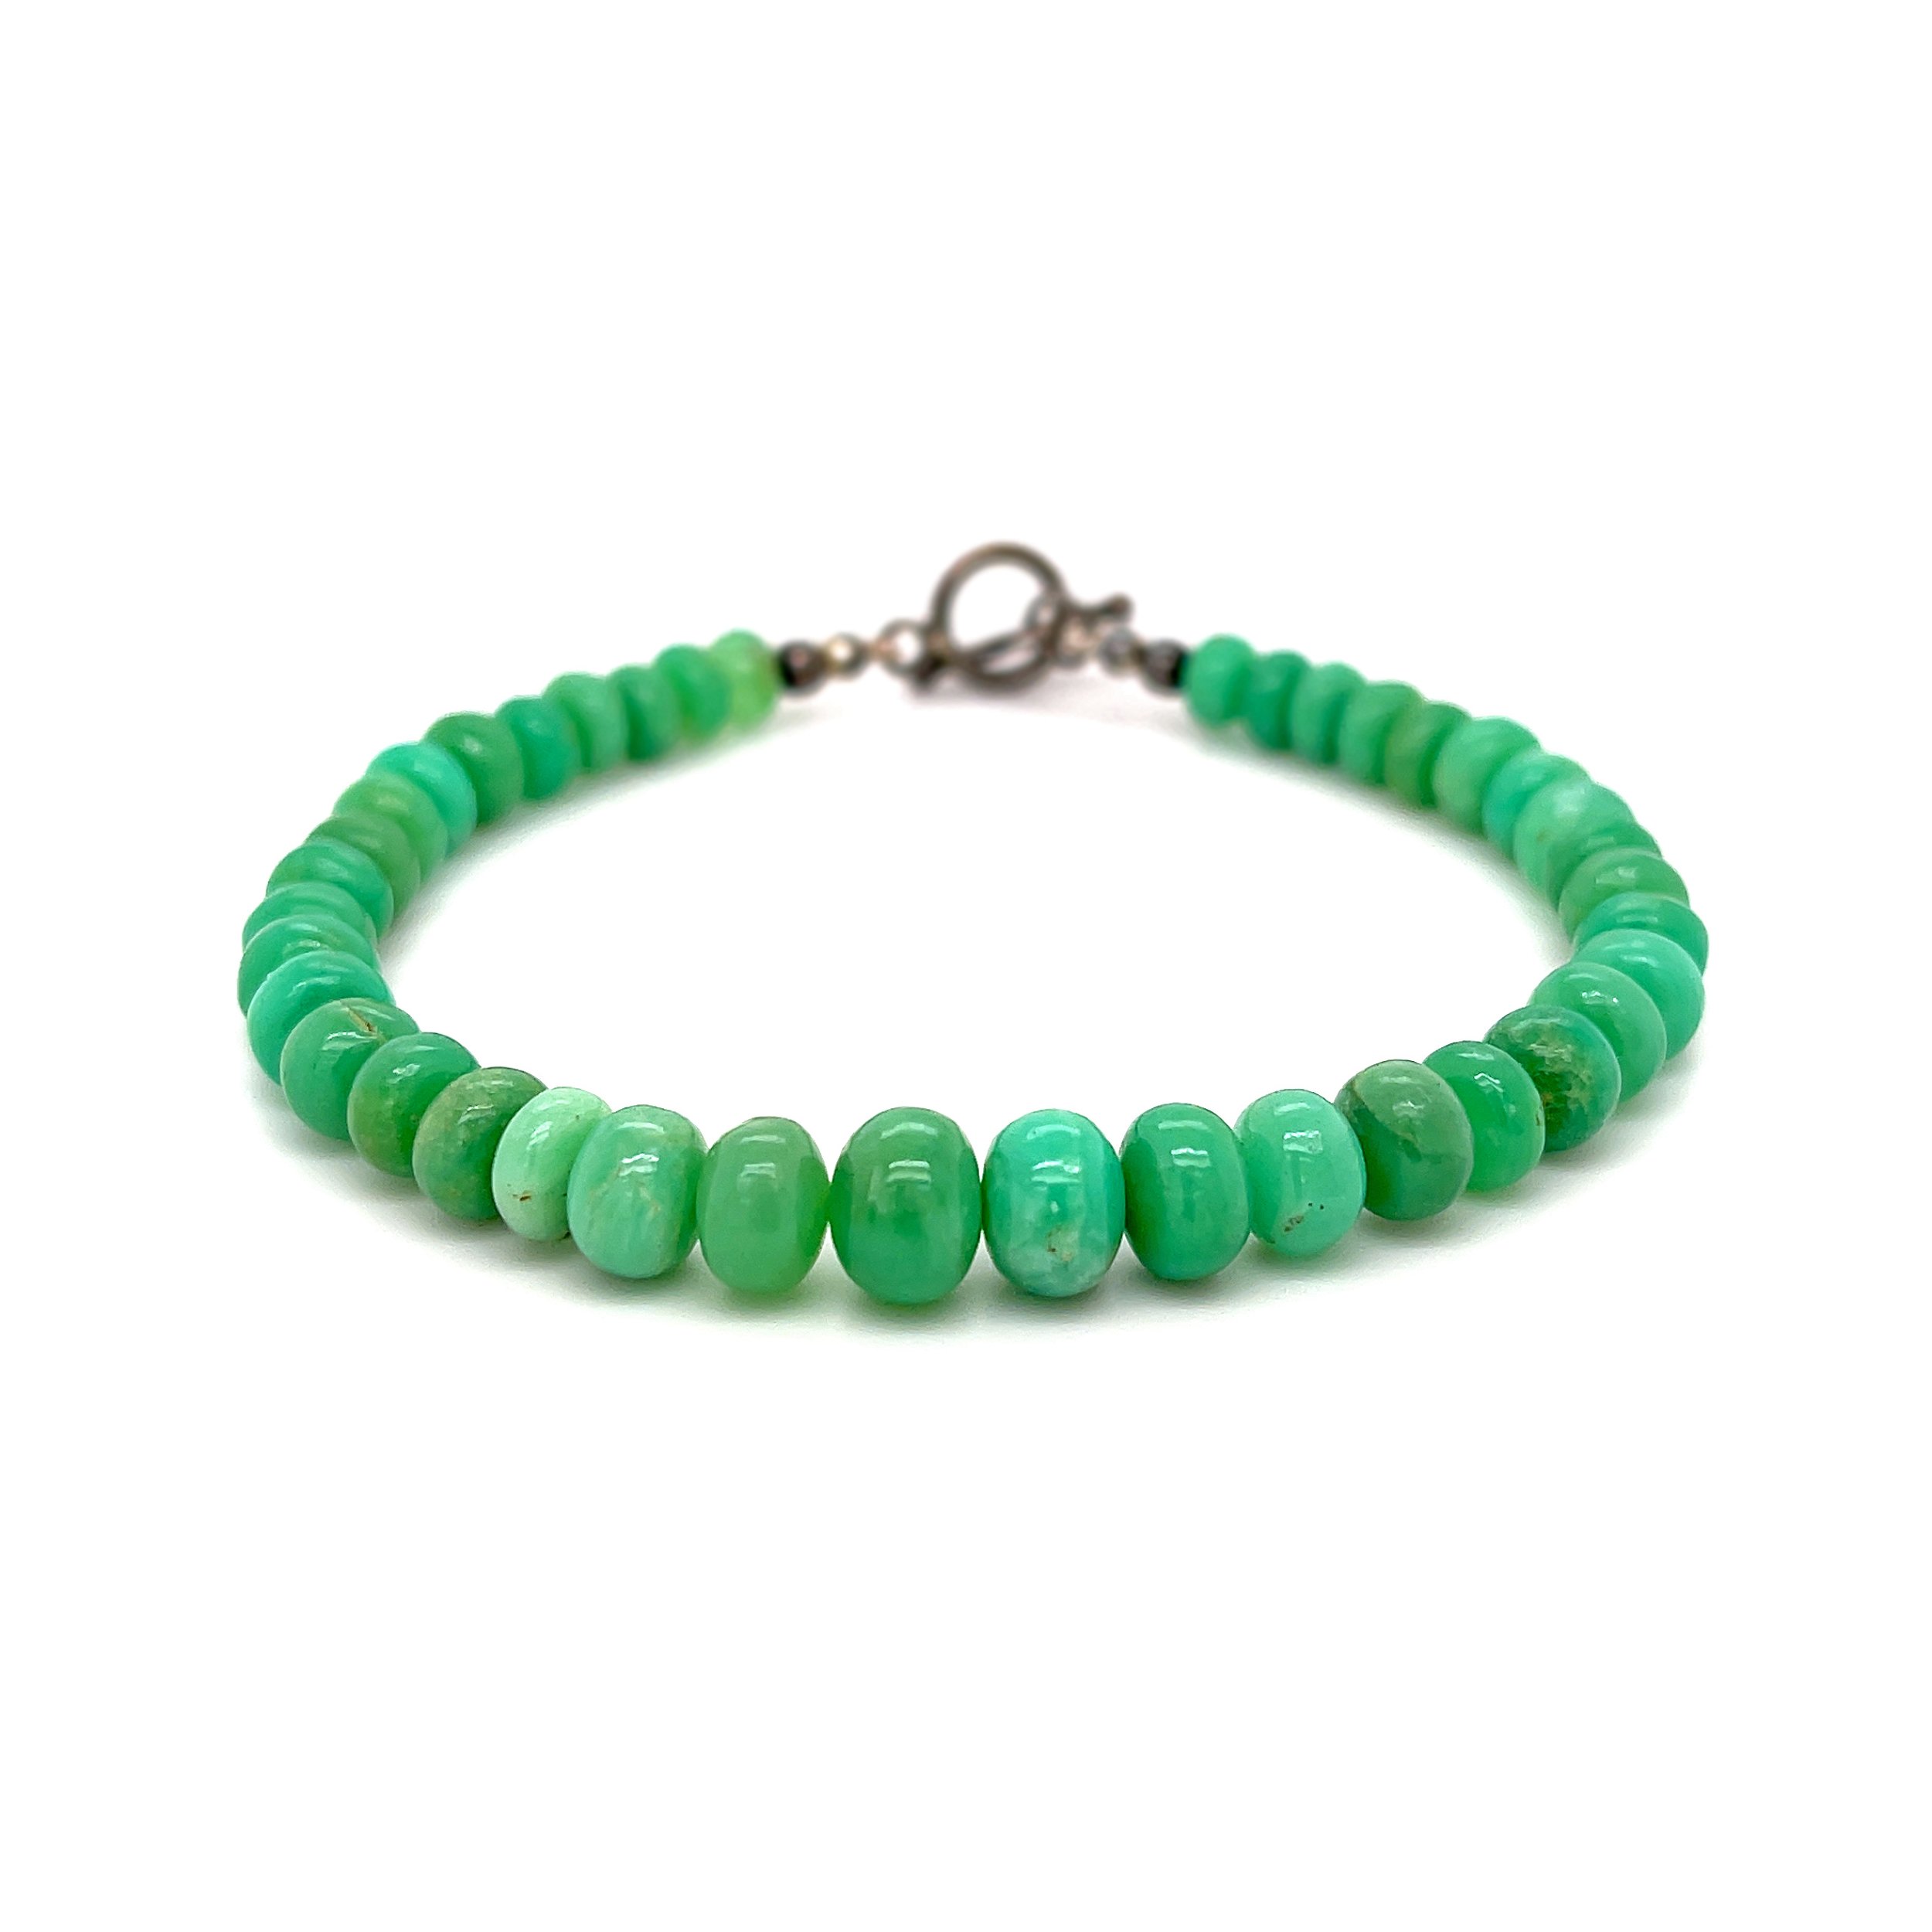 Chrysoprase Beaded Bracelet - Smooth Rondelle Beads With Silver Beading Accents & Toggle Clasp